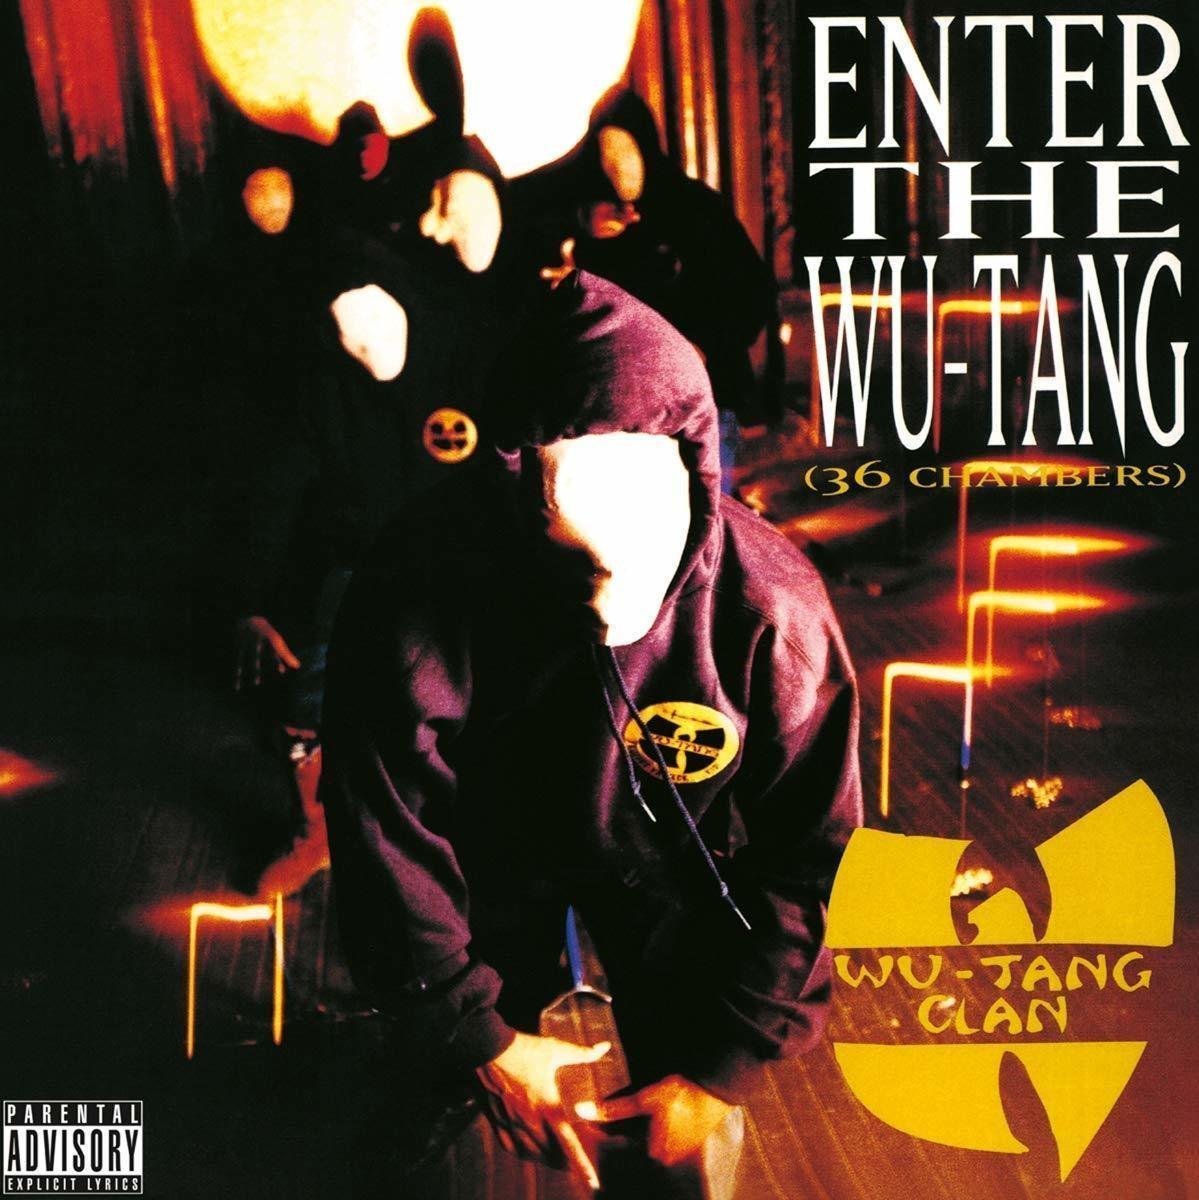 Disco in vinile Wu-Tang Clan - Enter the Wu-Tang Clan (36 Chambers) (Yellow Coloured) (LP)